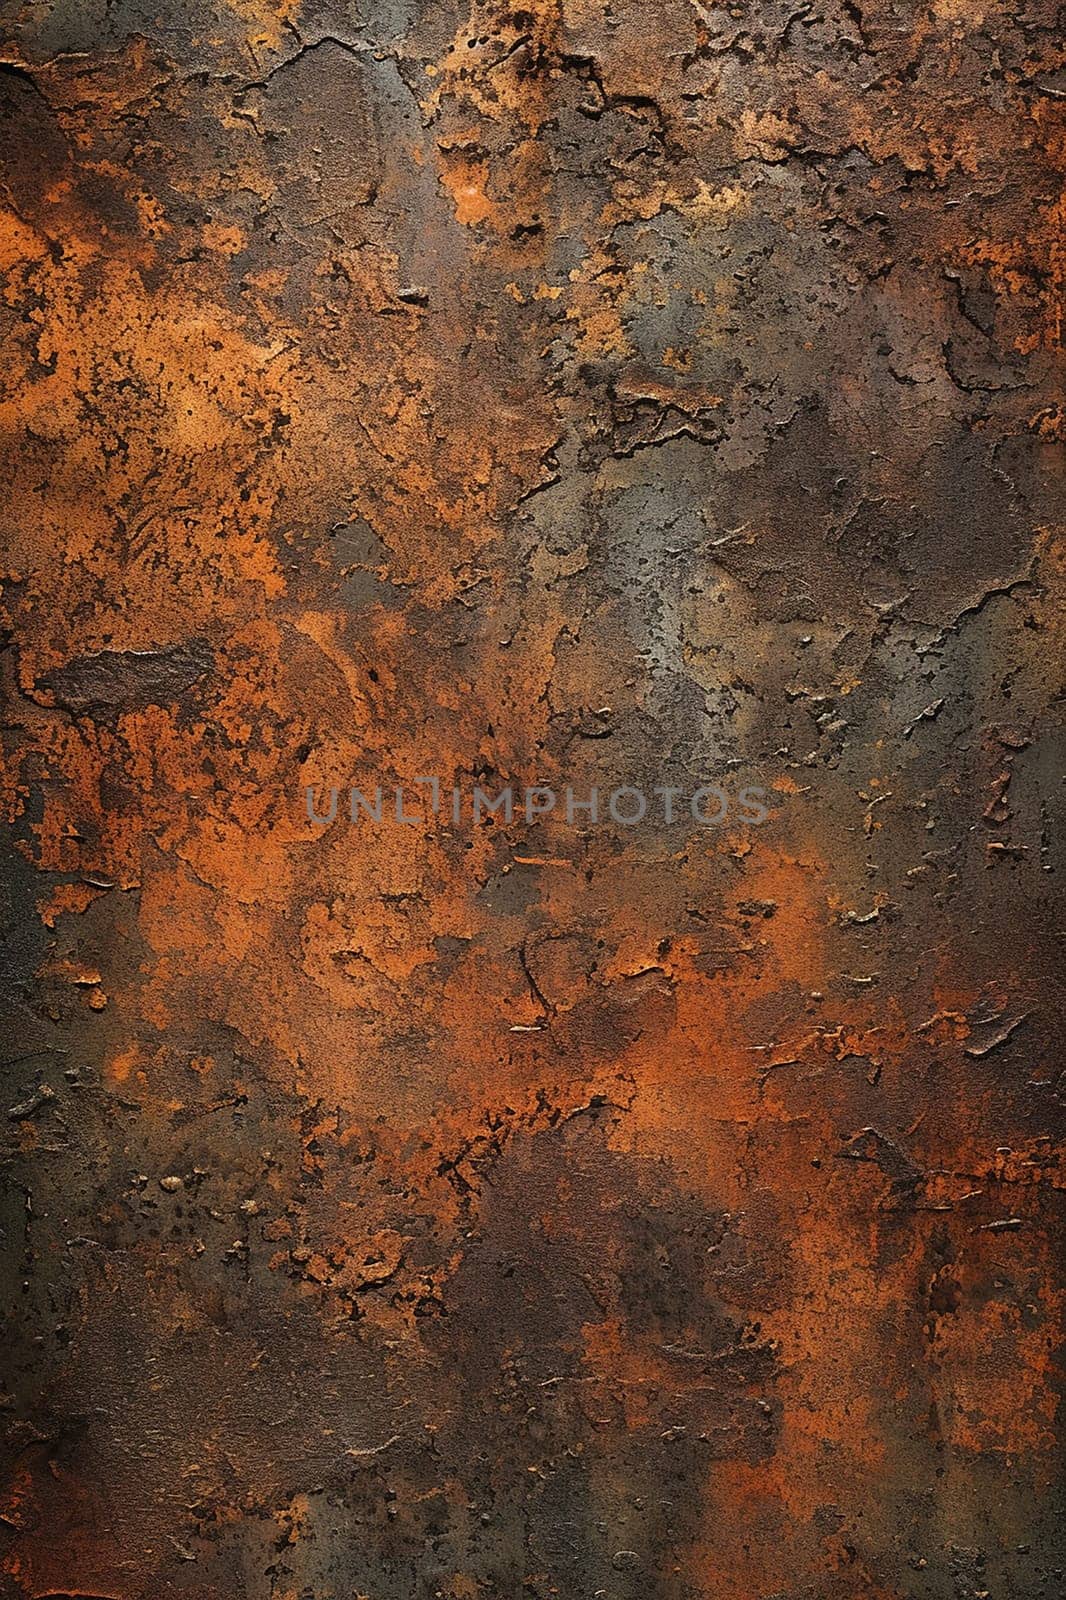 Dirt and rusty metal gate, wall texture background by Hype2art